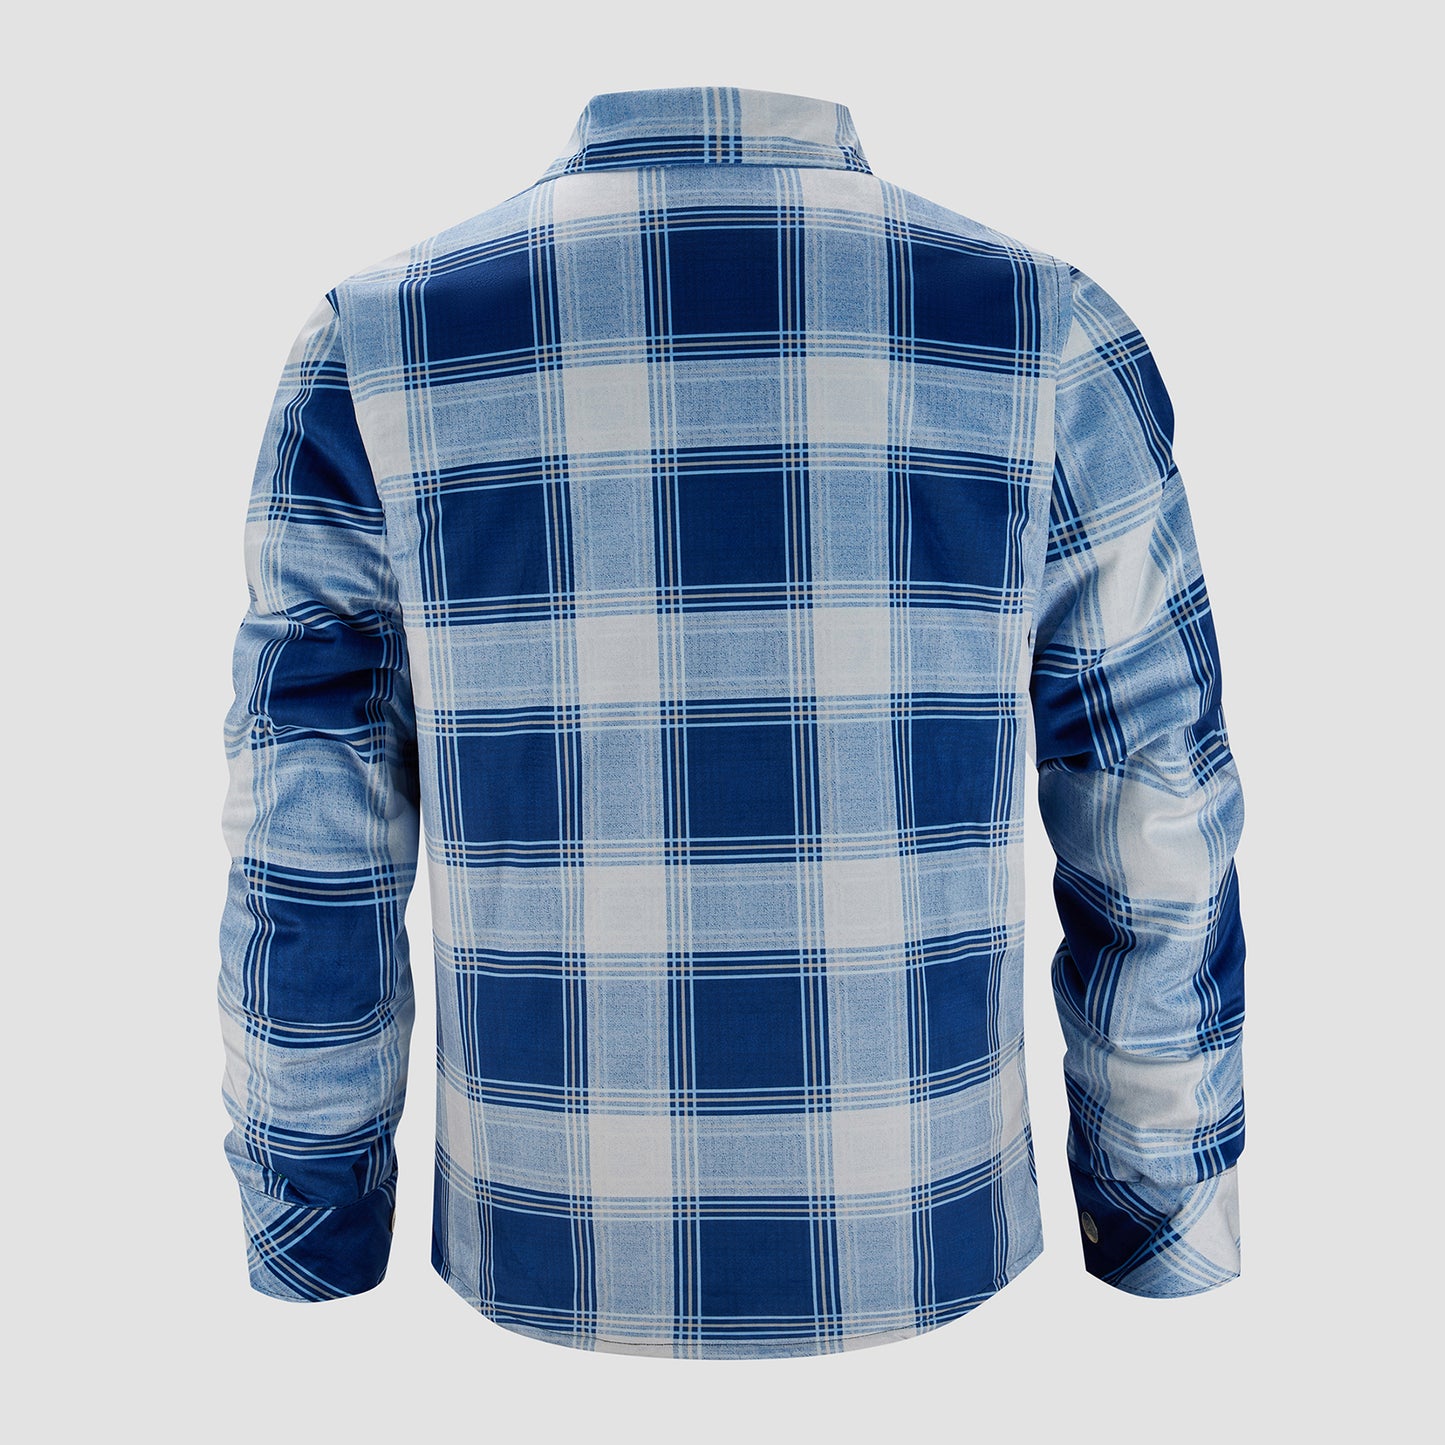 Long Sleeve Quilted Lined Plaid Flannel Shirt Jacket - Blue White